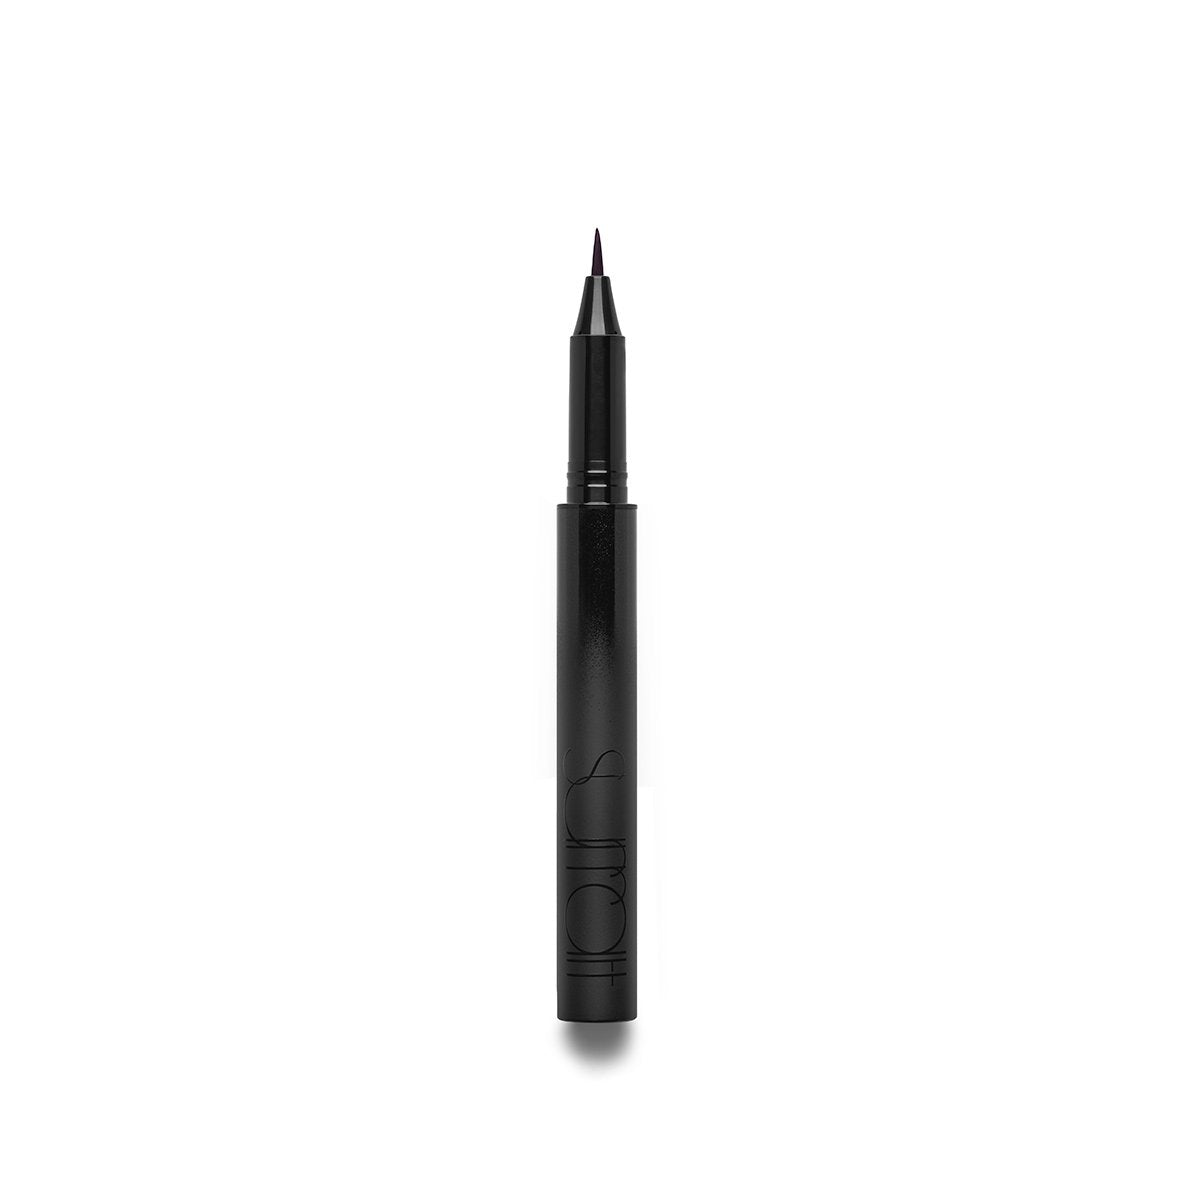 POUPRE - ROYAL PURPLE - liquid eyeliner with calligraphy-inspired brush in royal purple shade 